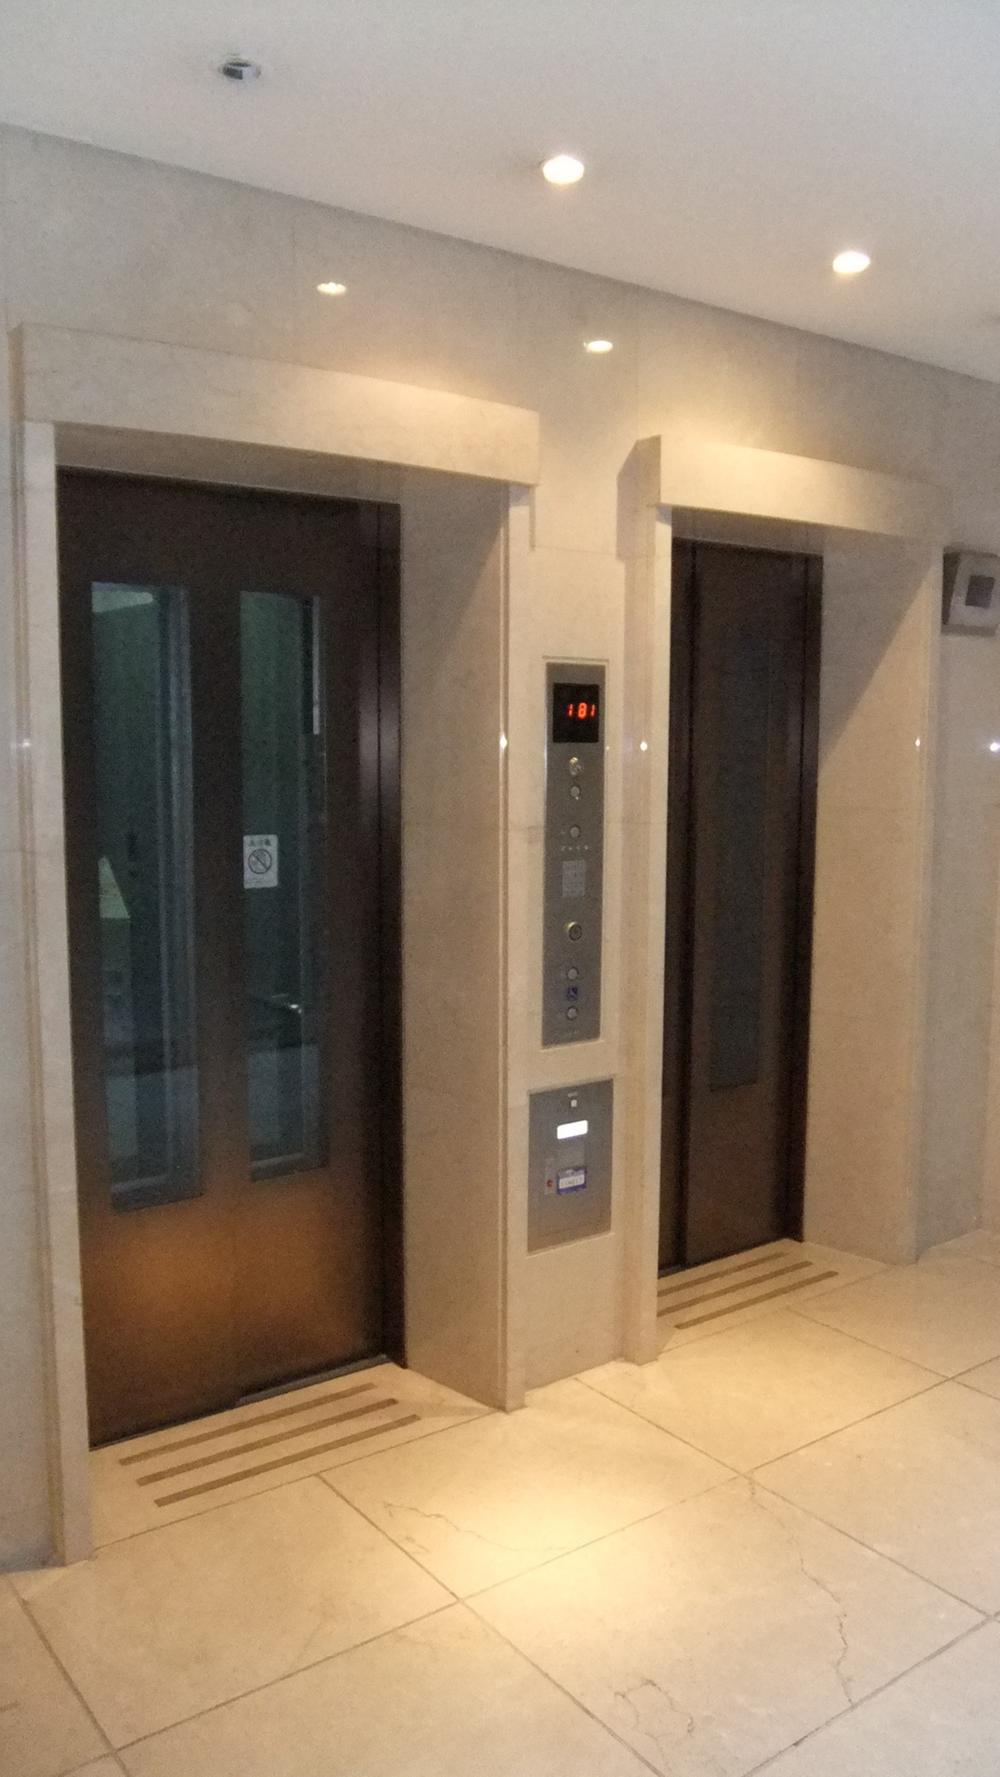 Other common areas. Firm elevator of security